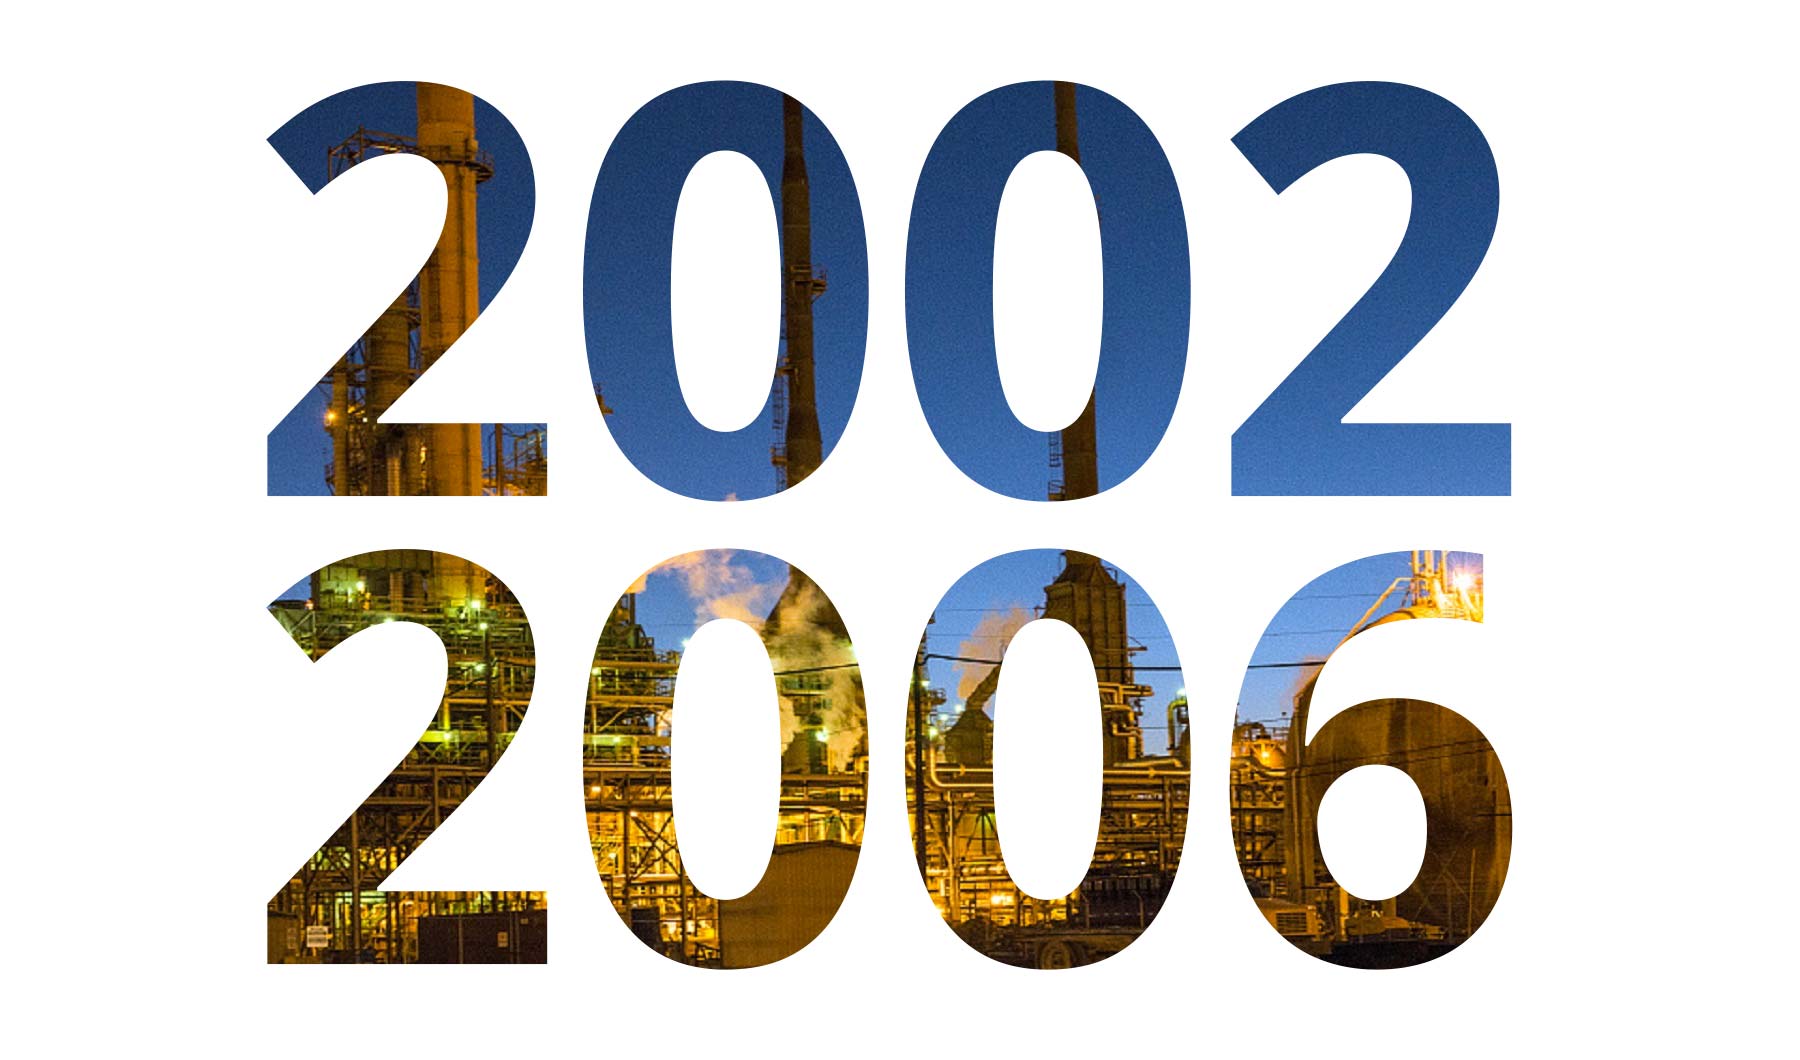 Stagnoli from 2002 to 2006